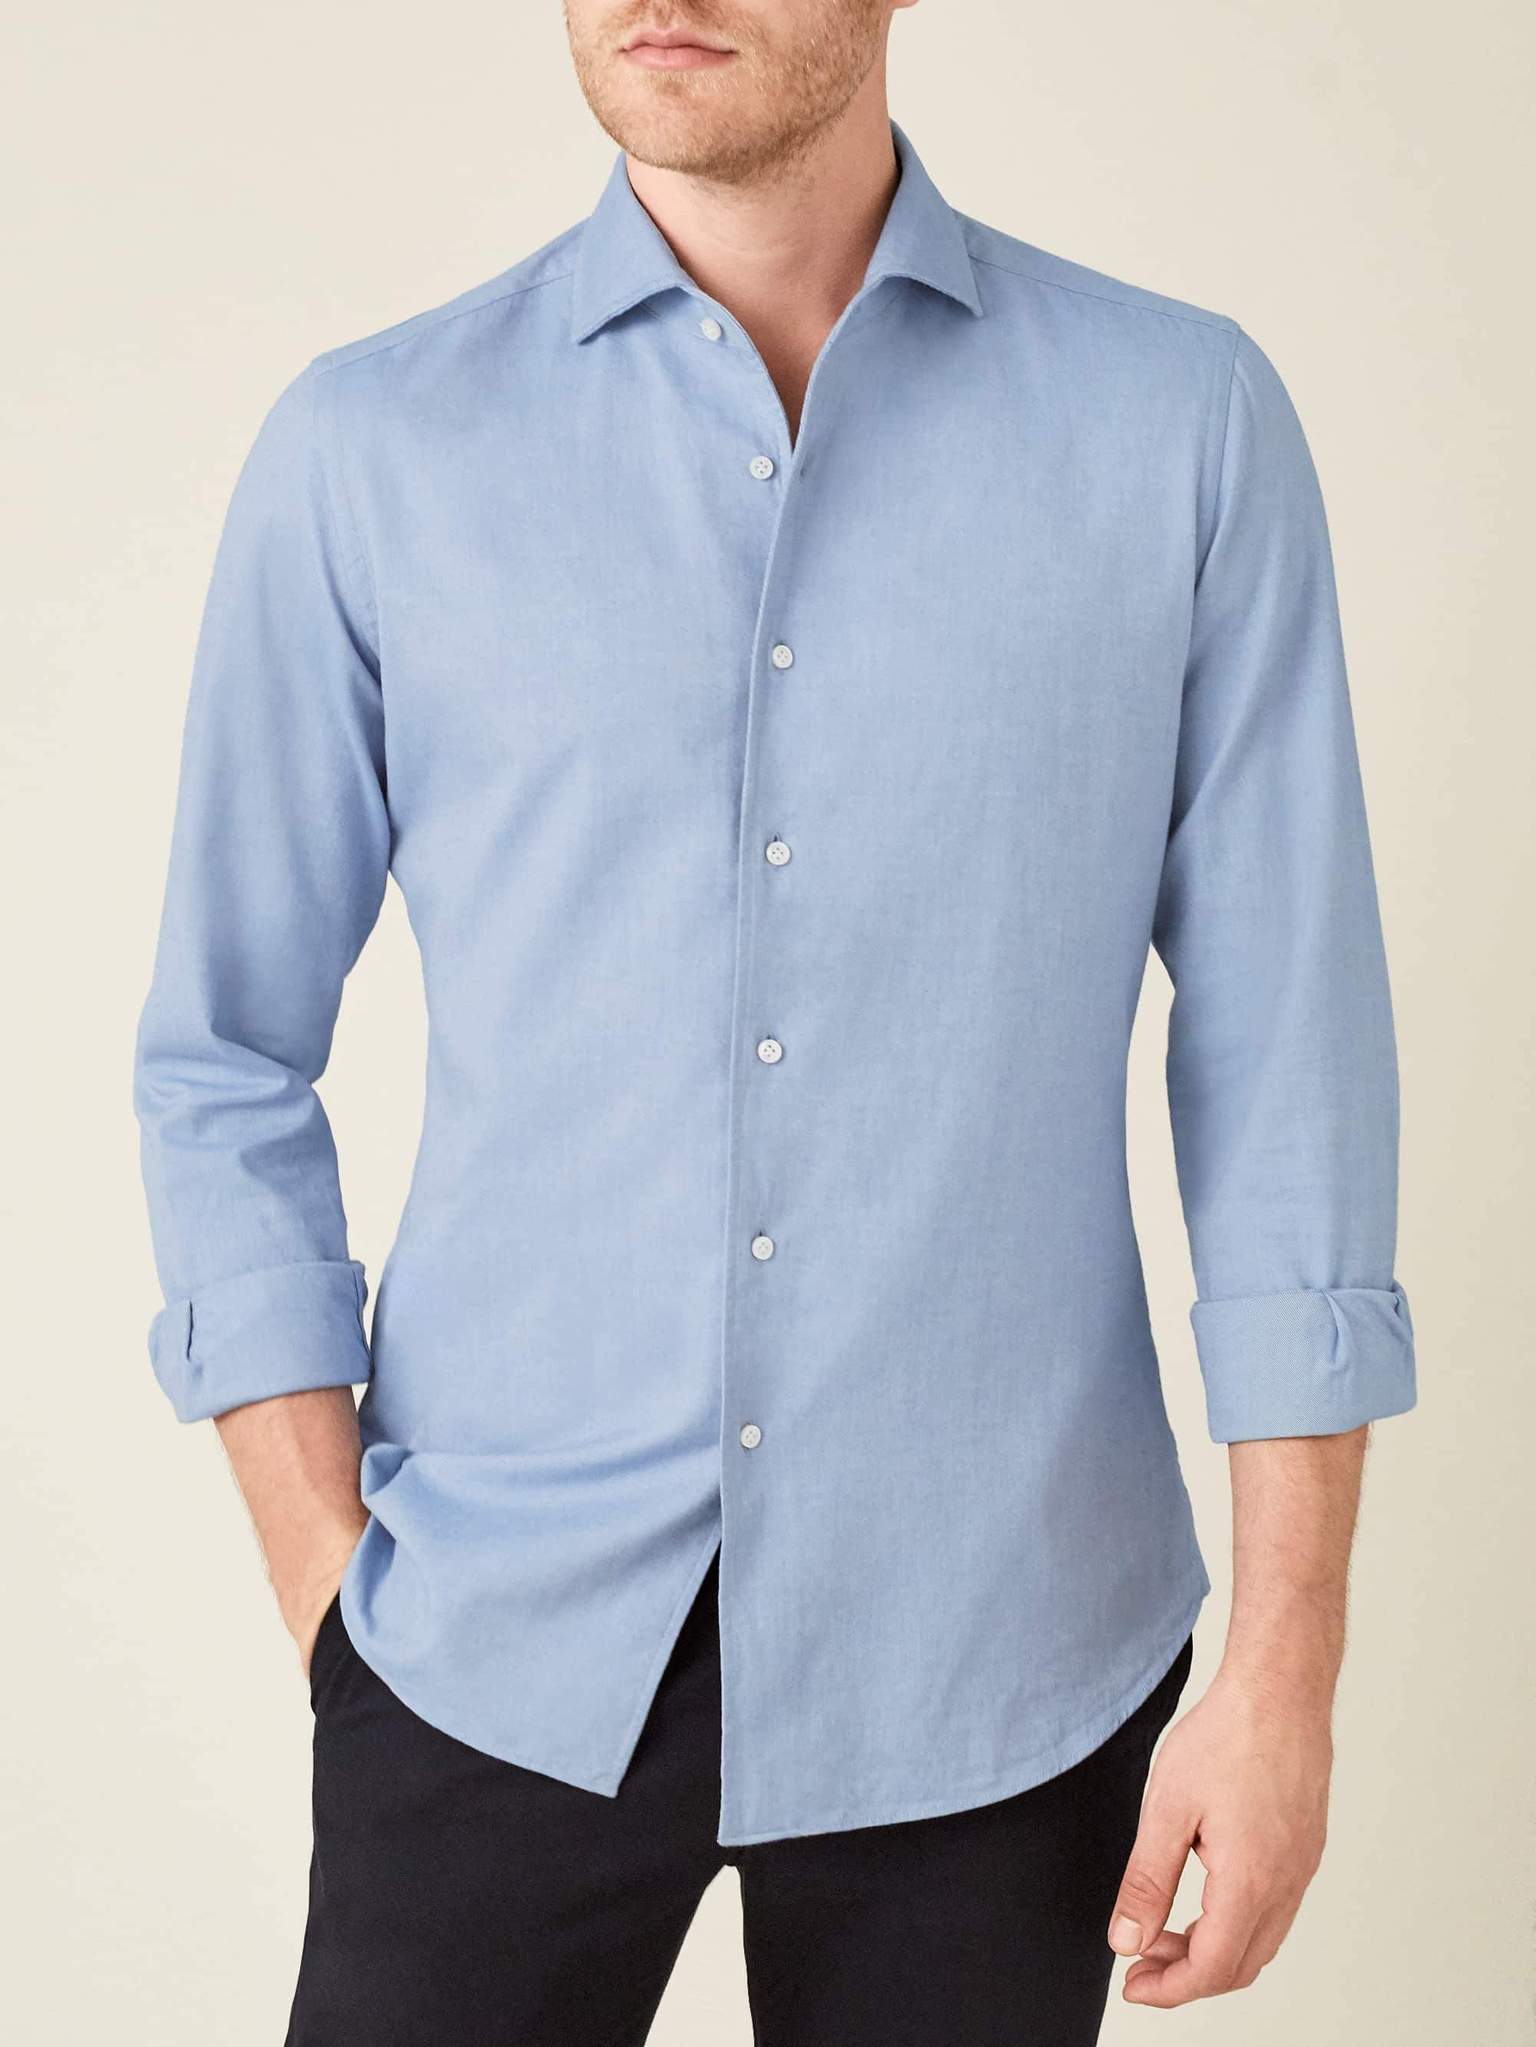 Luca Faloni Light Blue Brushed Cotton Made in Italy